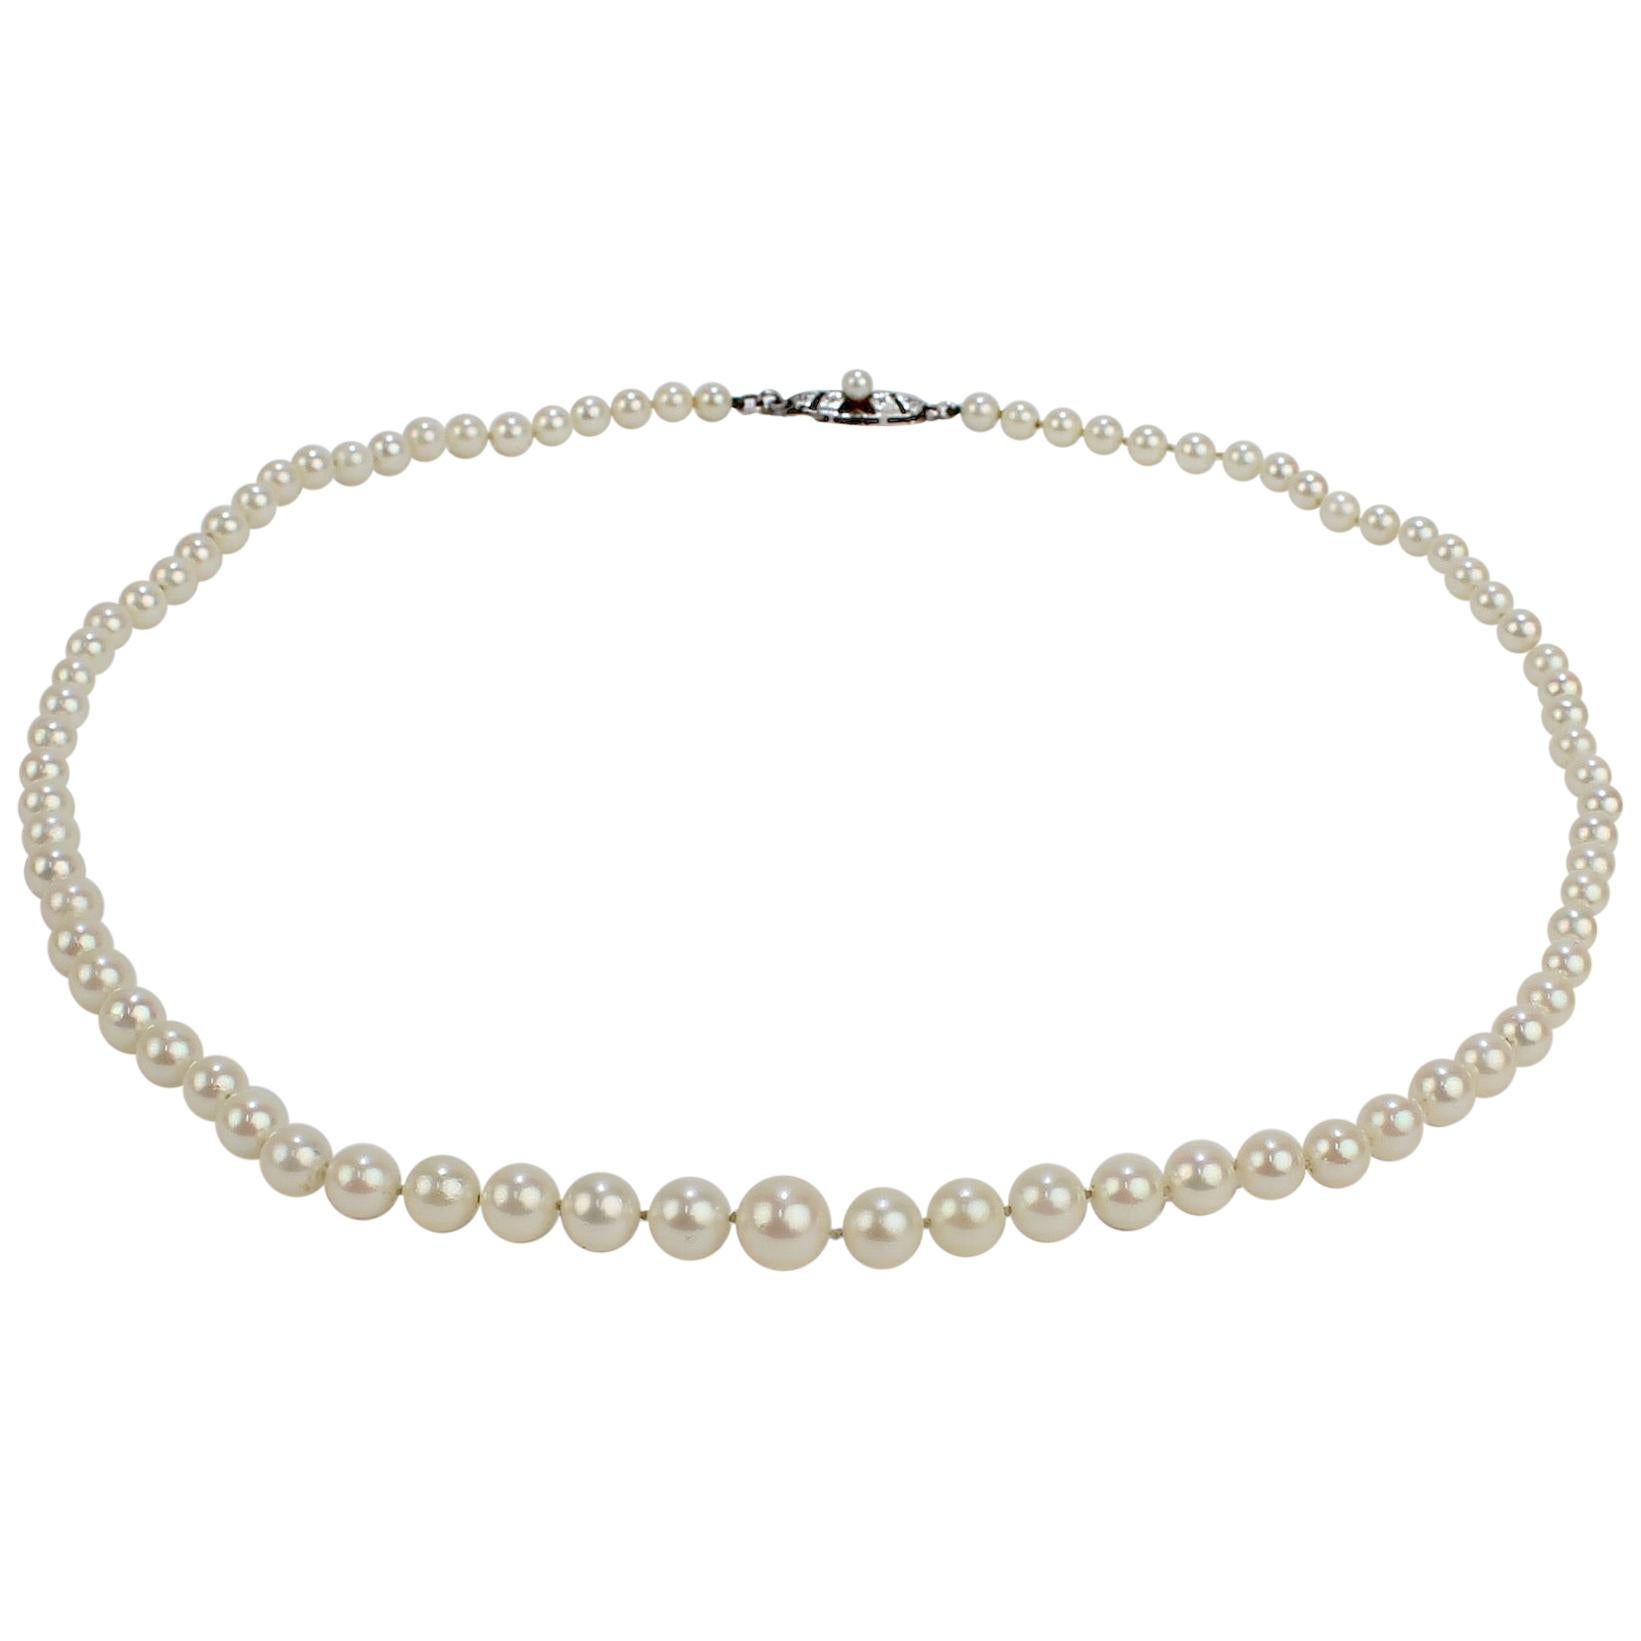 Vintage Mikimoto Graduated Akoya Cultured Pearl Necklace with Silver Clasp